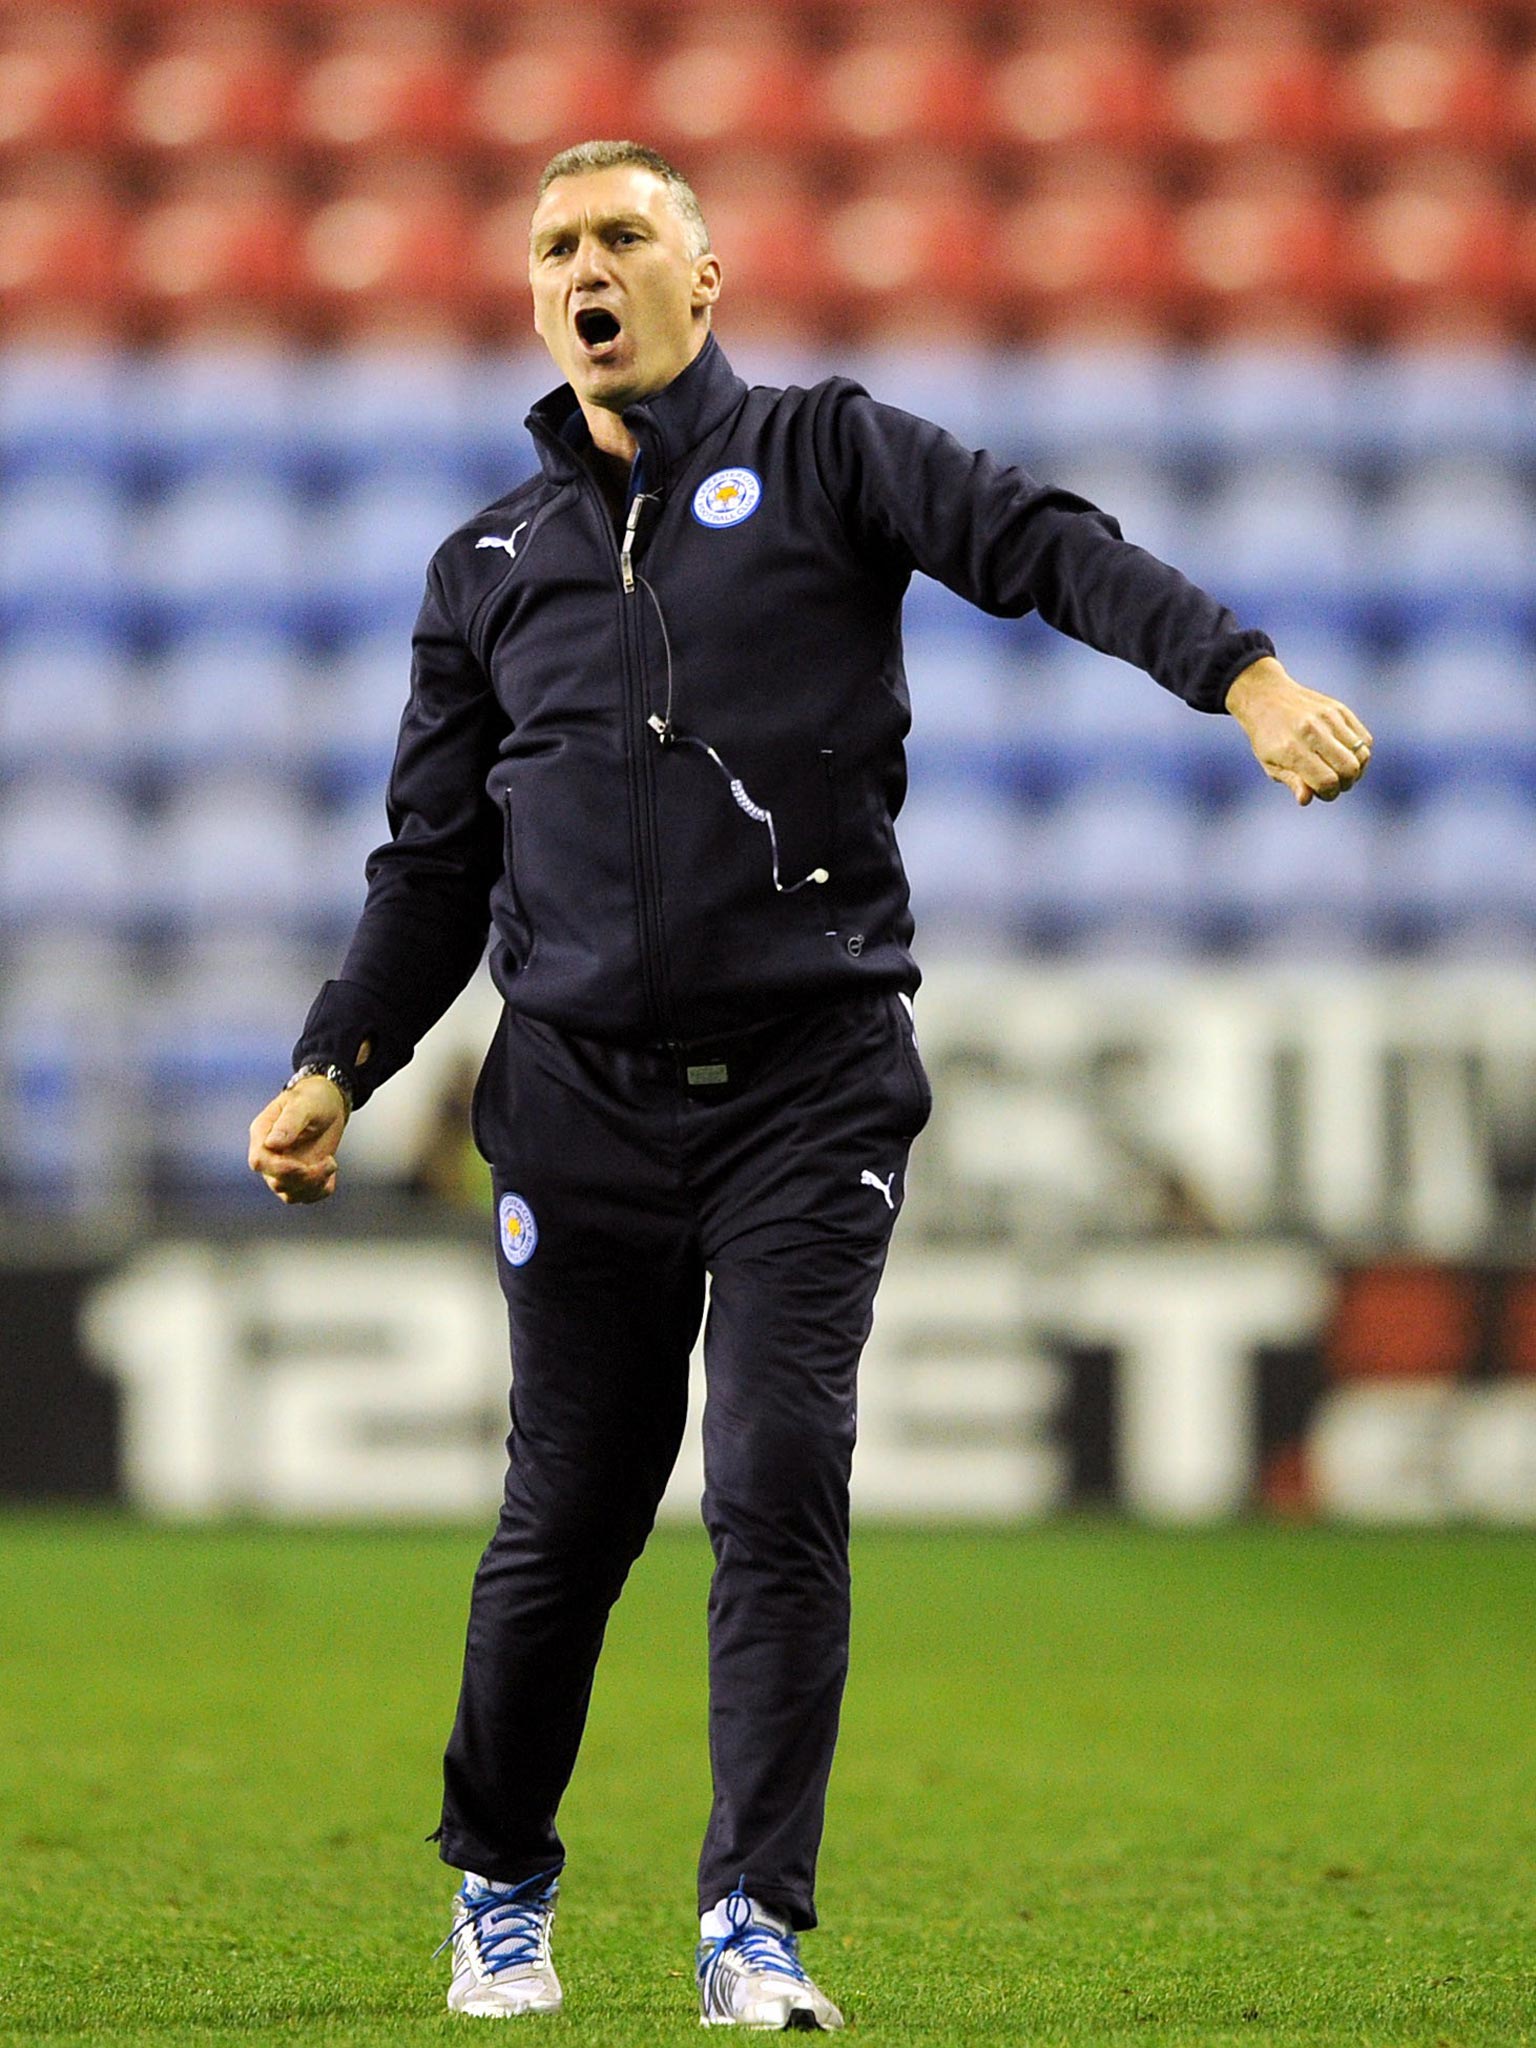 Nigel Pearson will find that winning promotion is just the start when it comes to stress